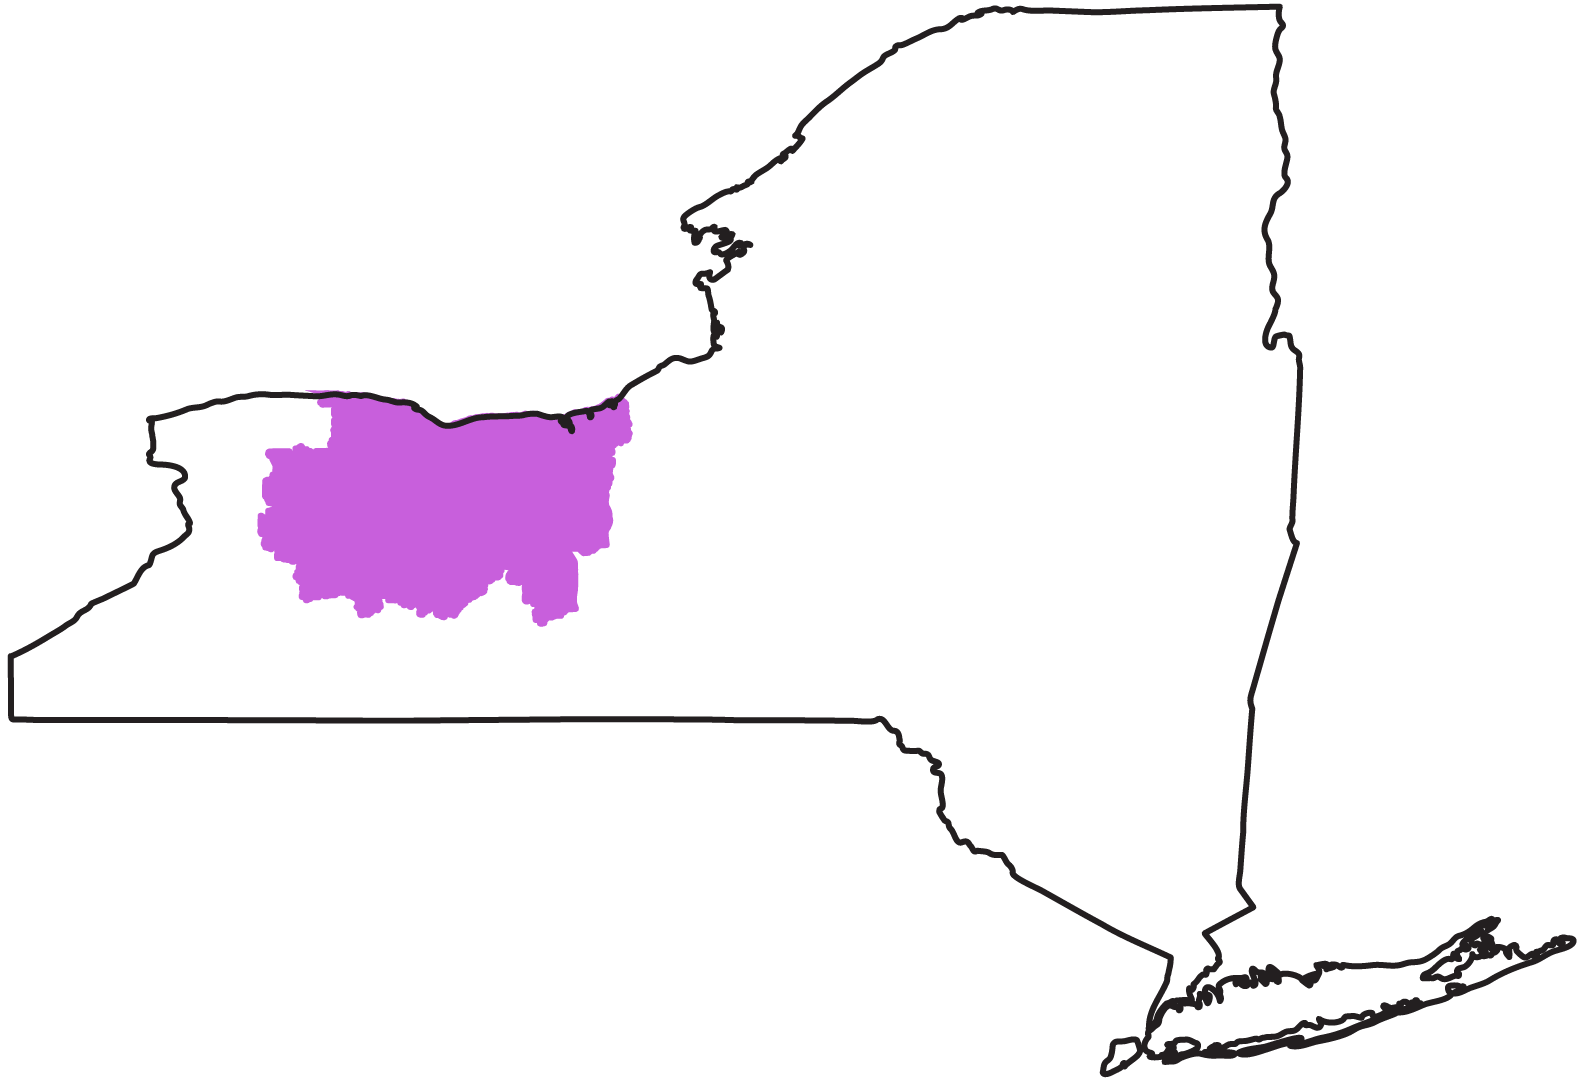 New York State map highlighting the Mid-West region